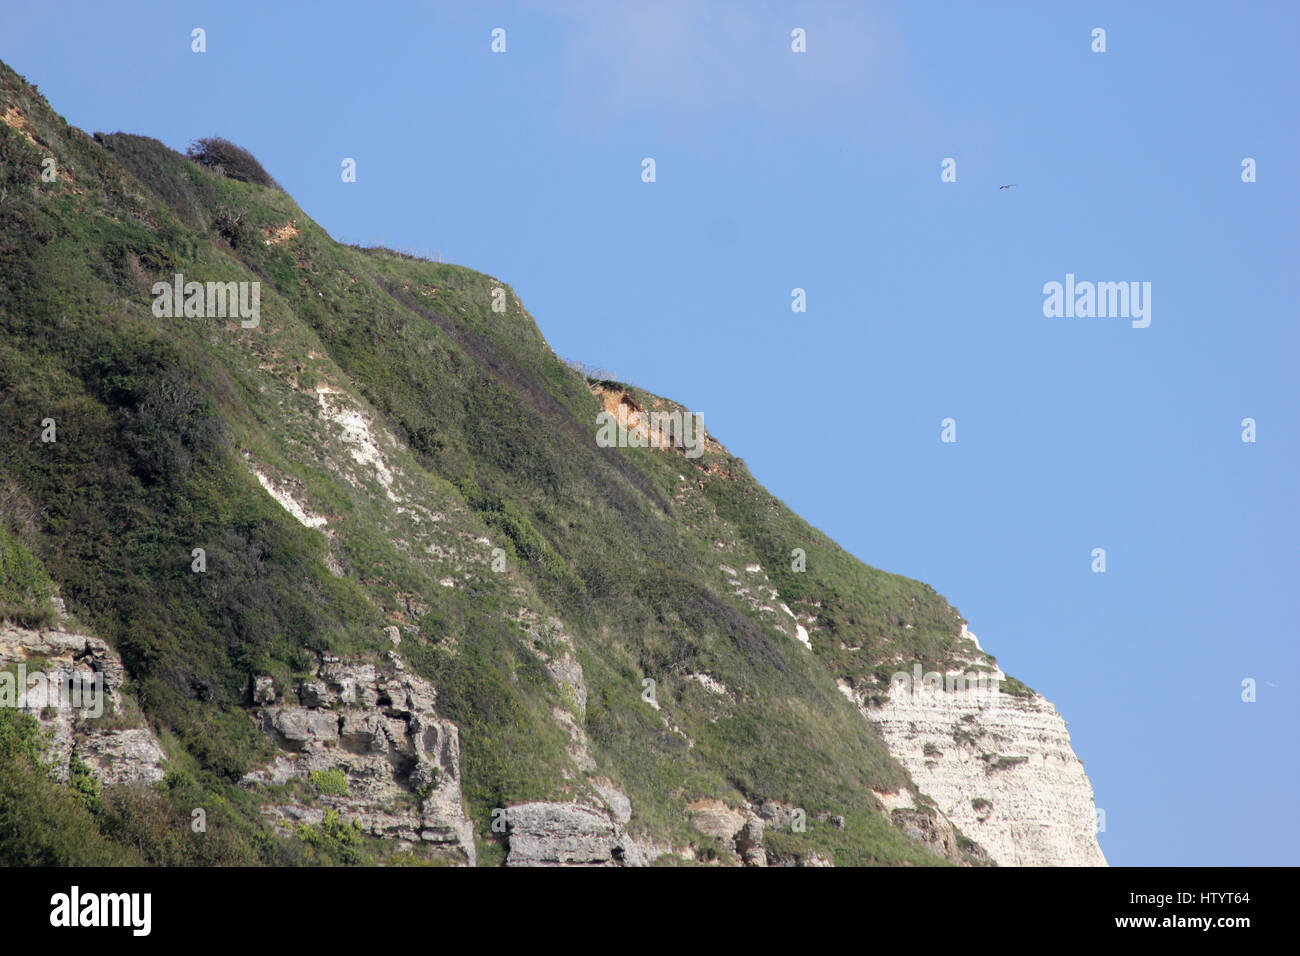 The top of the cliffs between Branscombe and Beer Head, Devon, taken from Branscombe beach looking east on a sunny day with blue sky Stock Photo